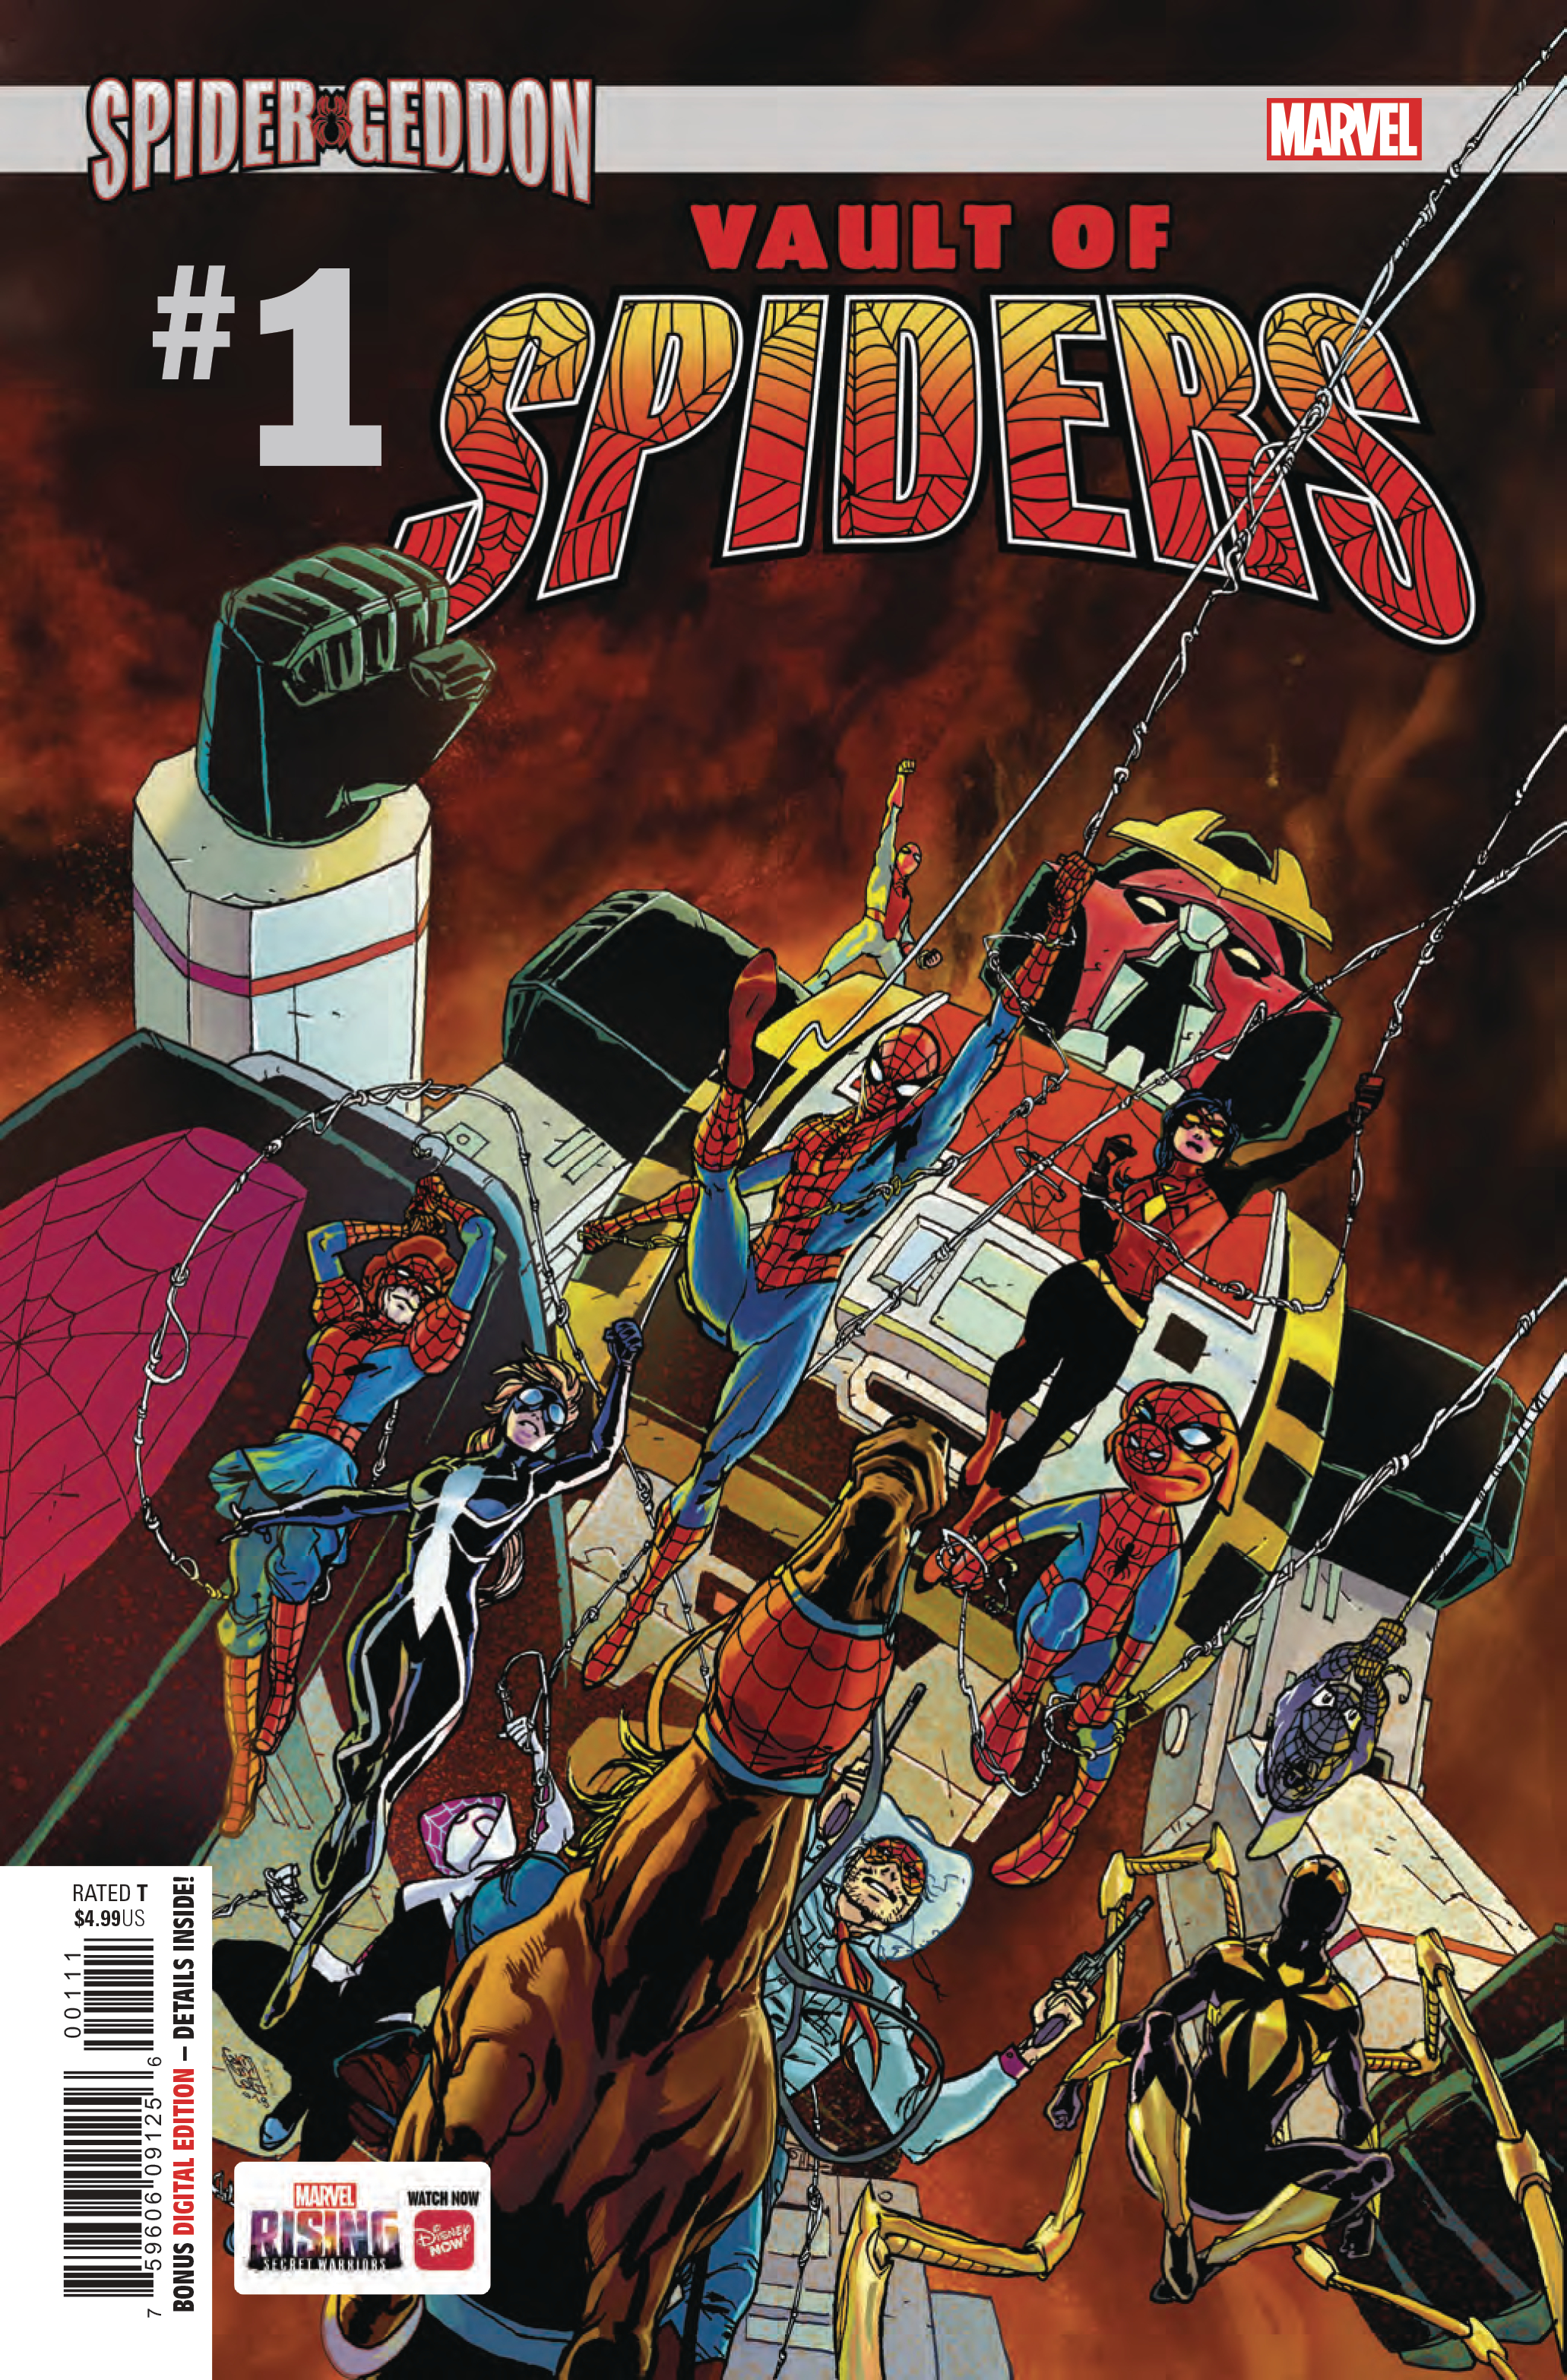 VAULT OF SPIDERS #1 (OF 2) SG